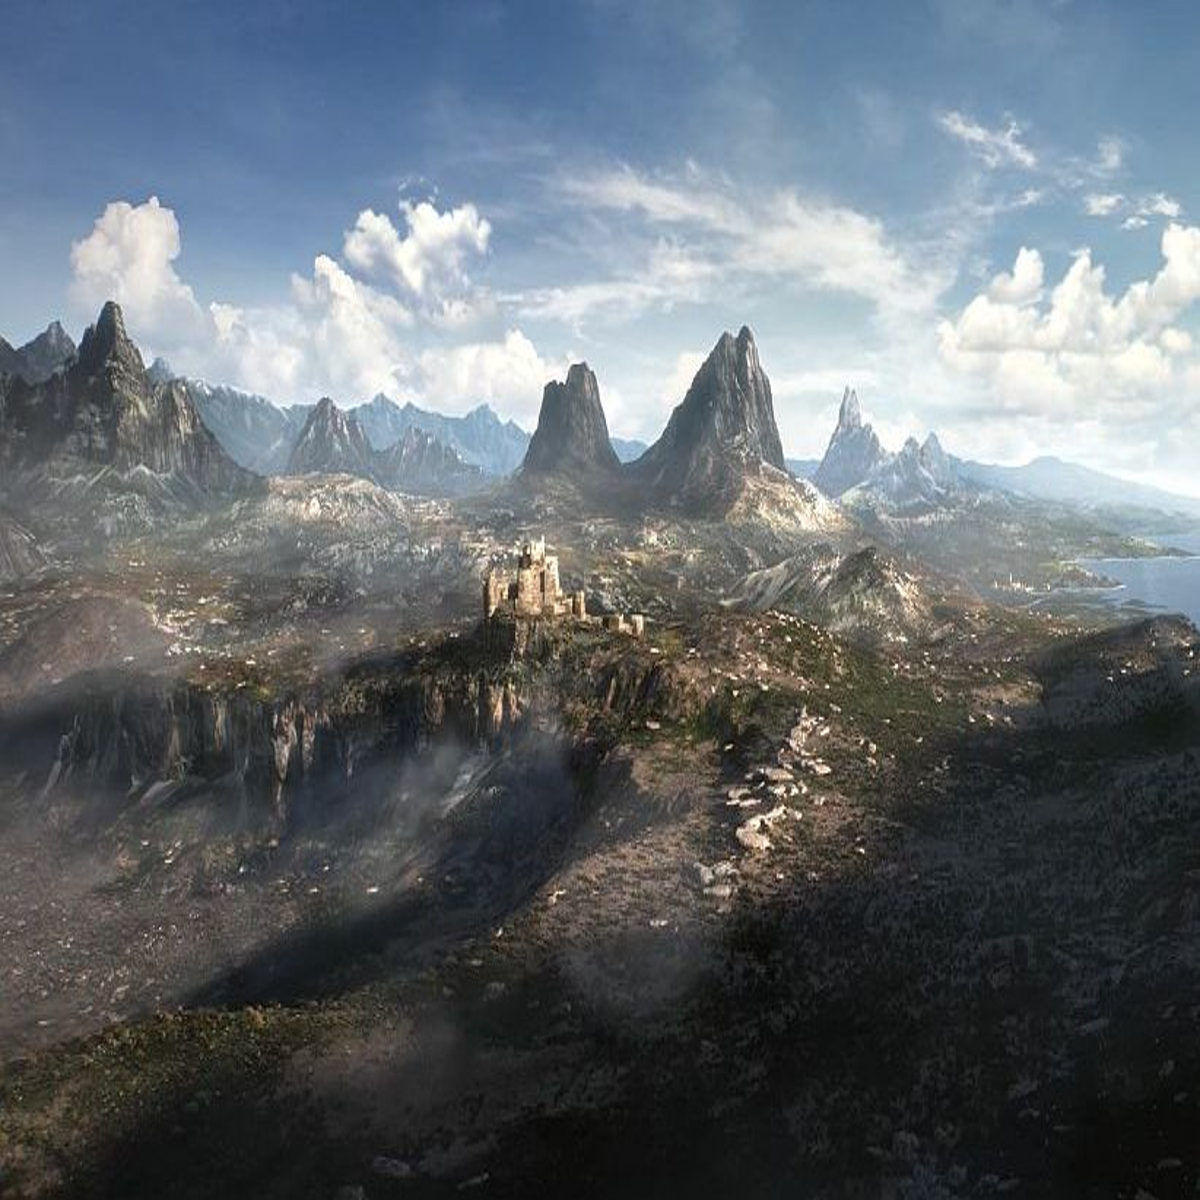 Everything we know about 'The Elder Scrolls 6